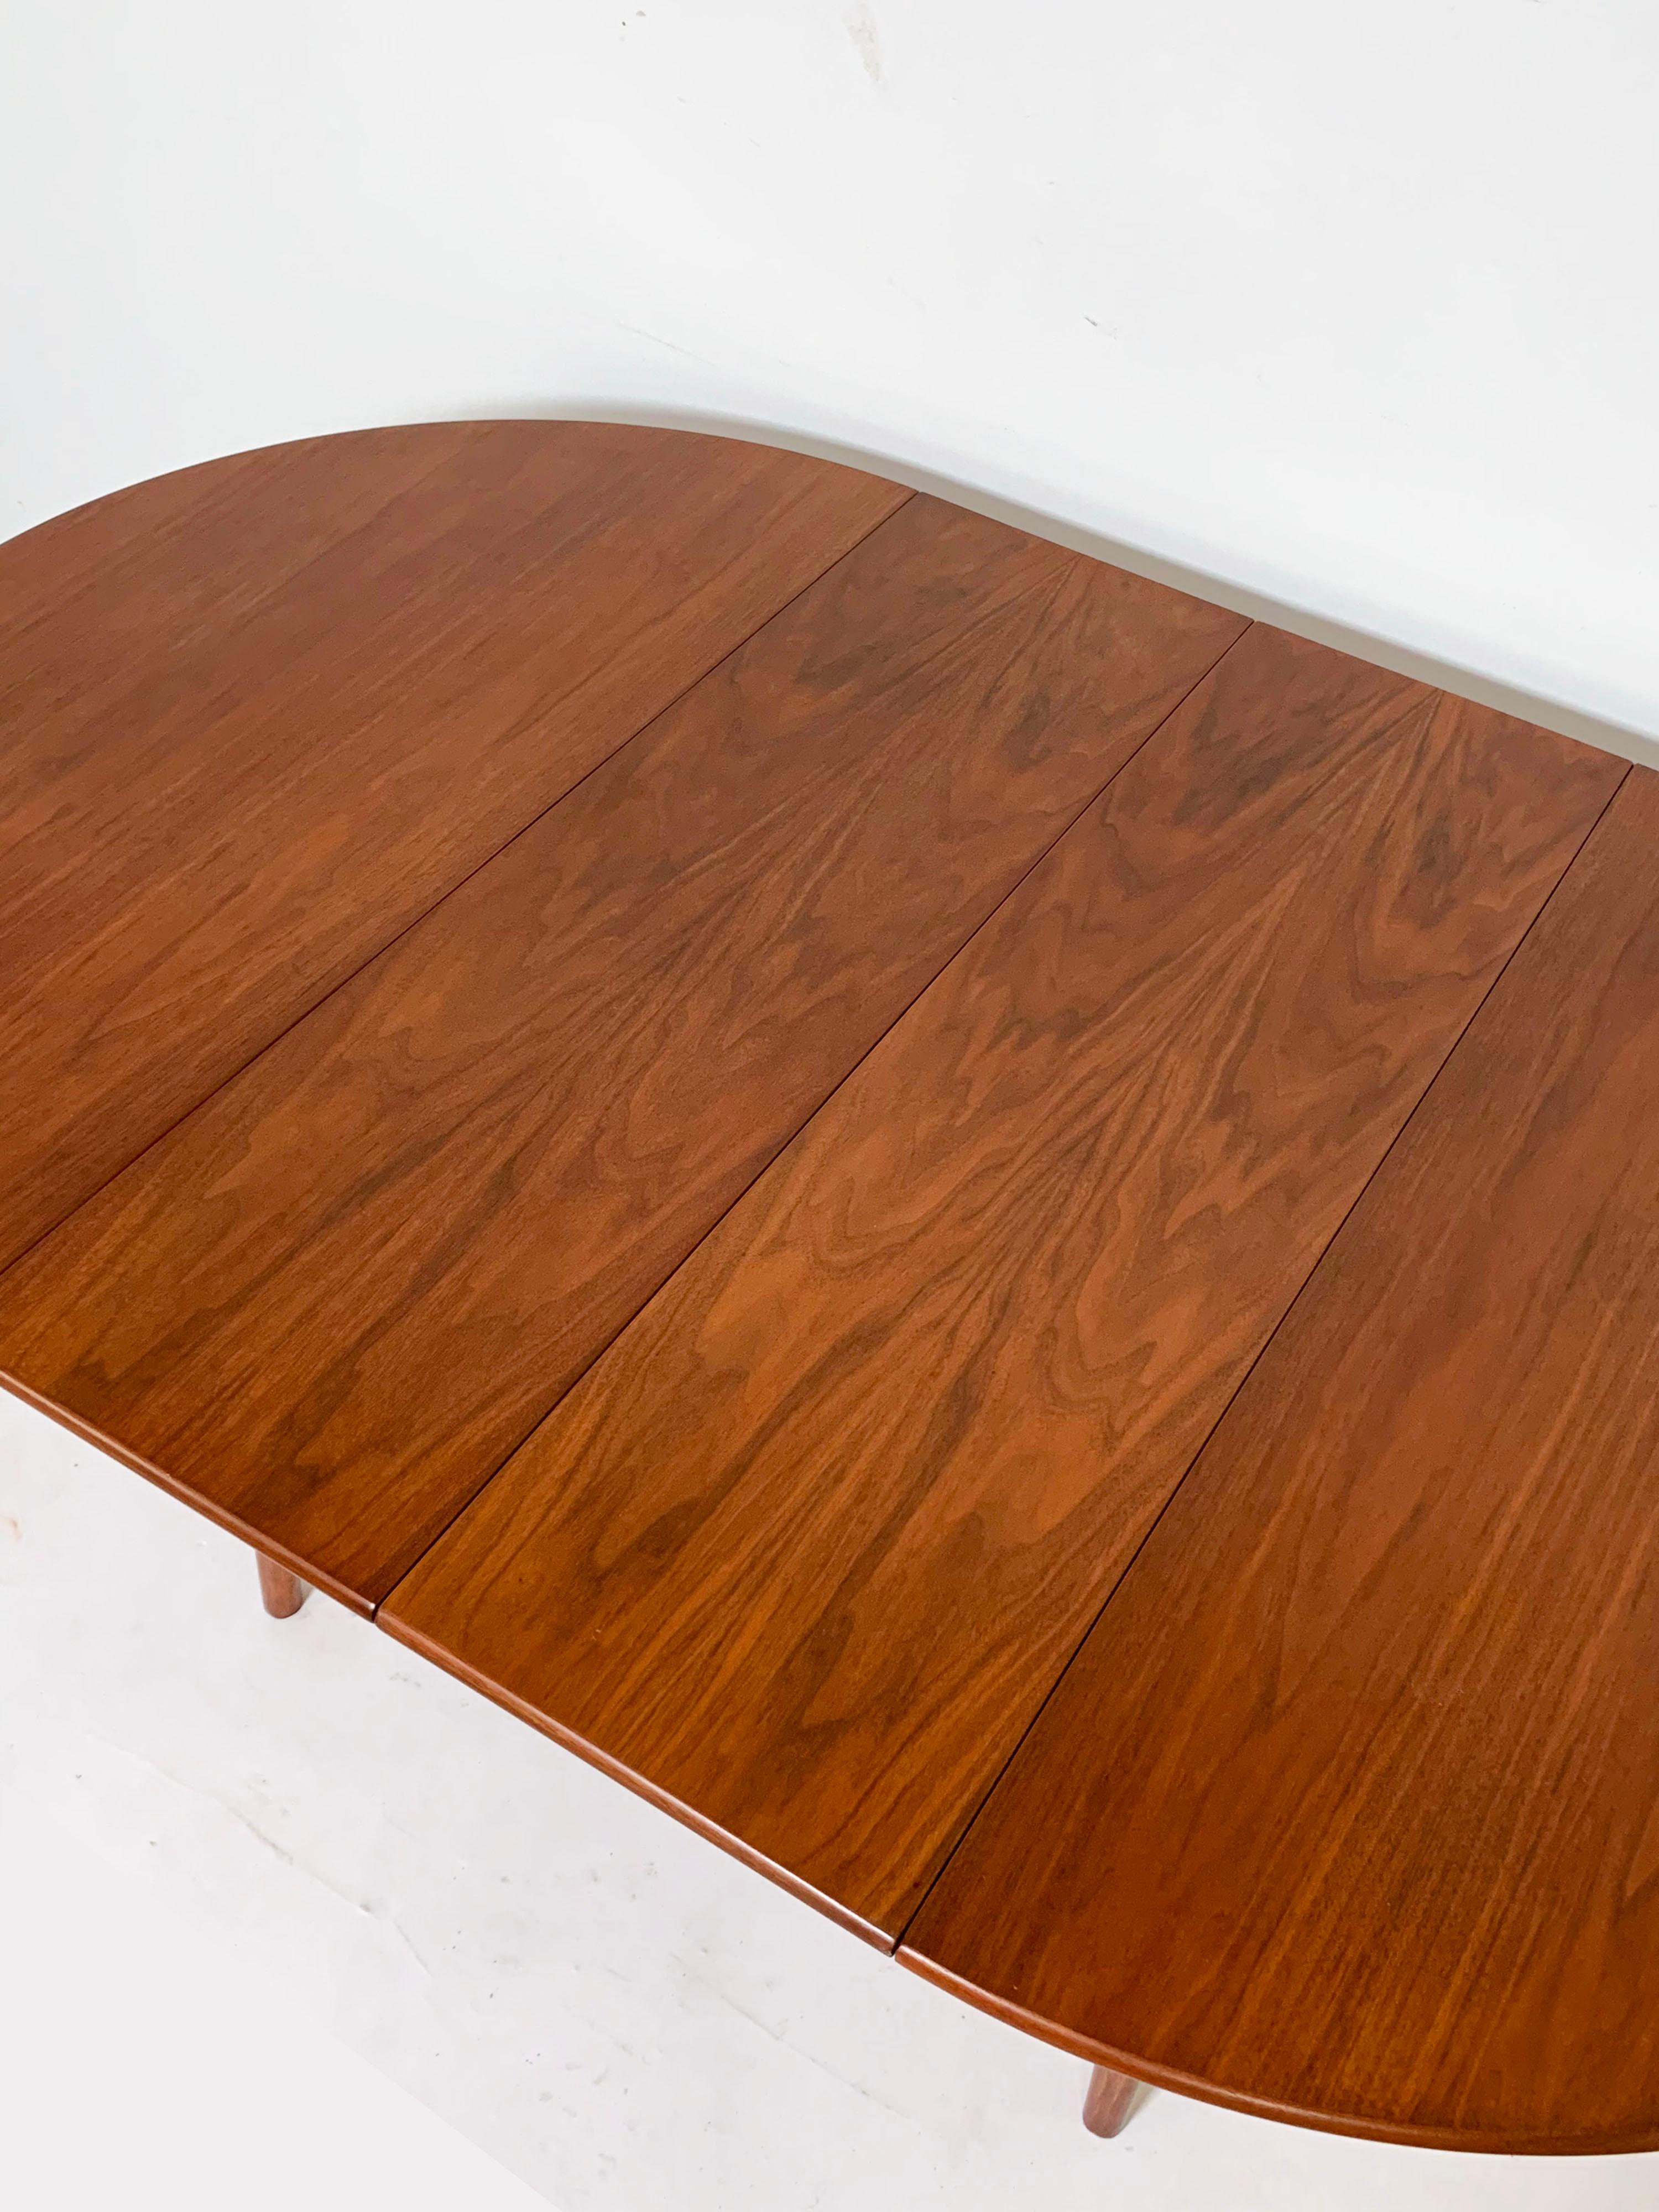 Mid-20th Century Round Danish Teak Dining Table with Two Leaves, circa 1960s